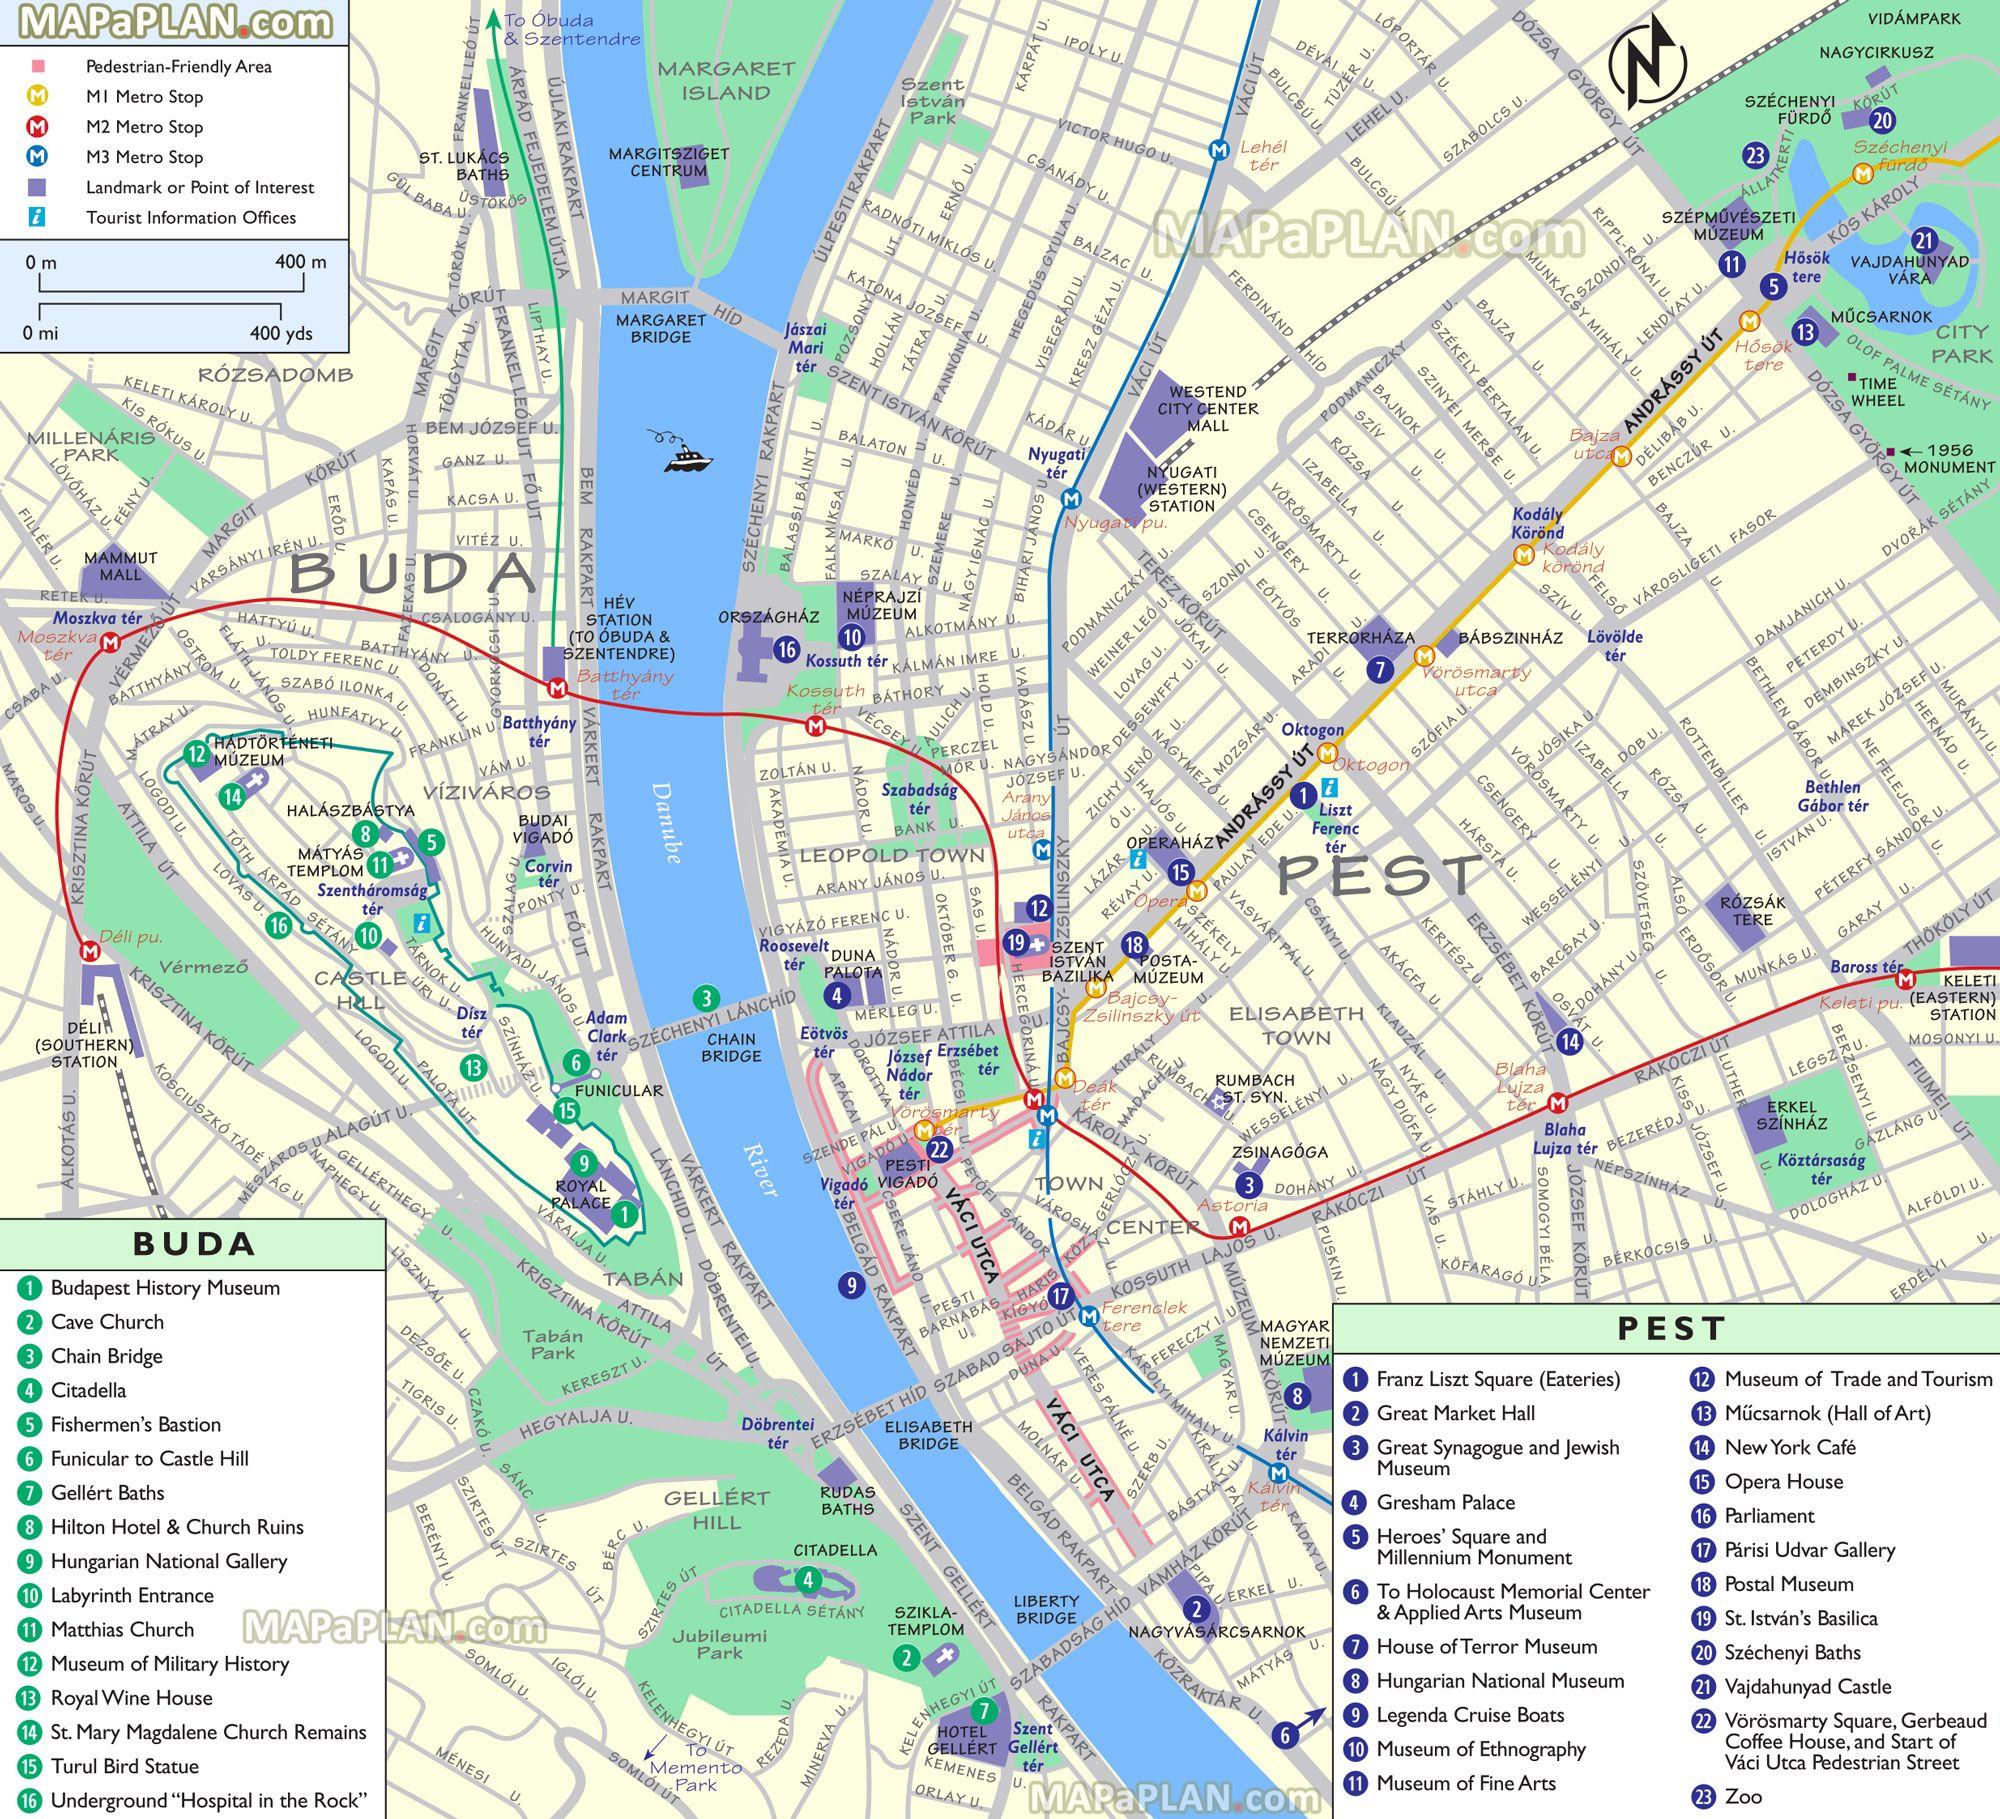 budapest tourist attractions map